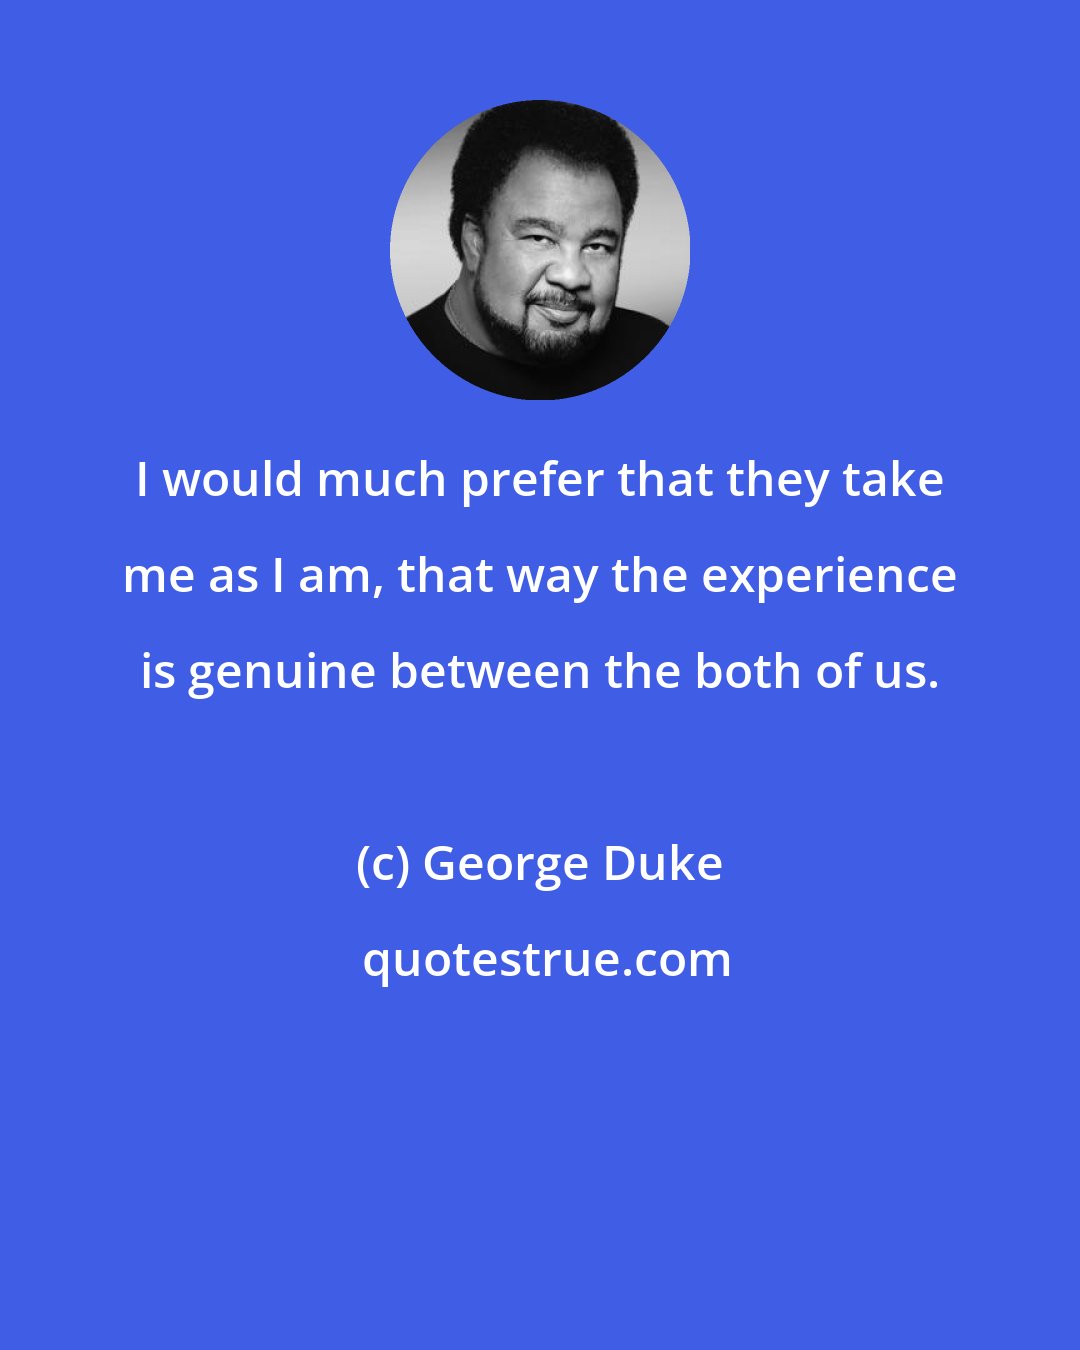 George Duke: I would much prefer that they take me as I am, that way the experience is genuine between the both of us.